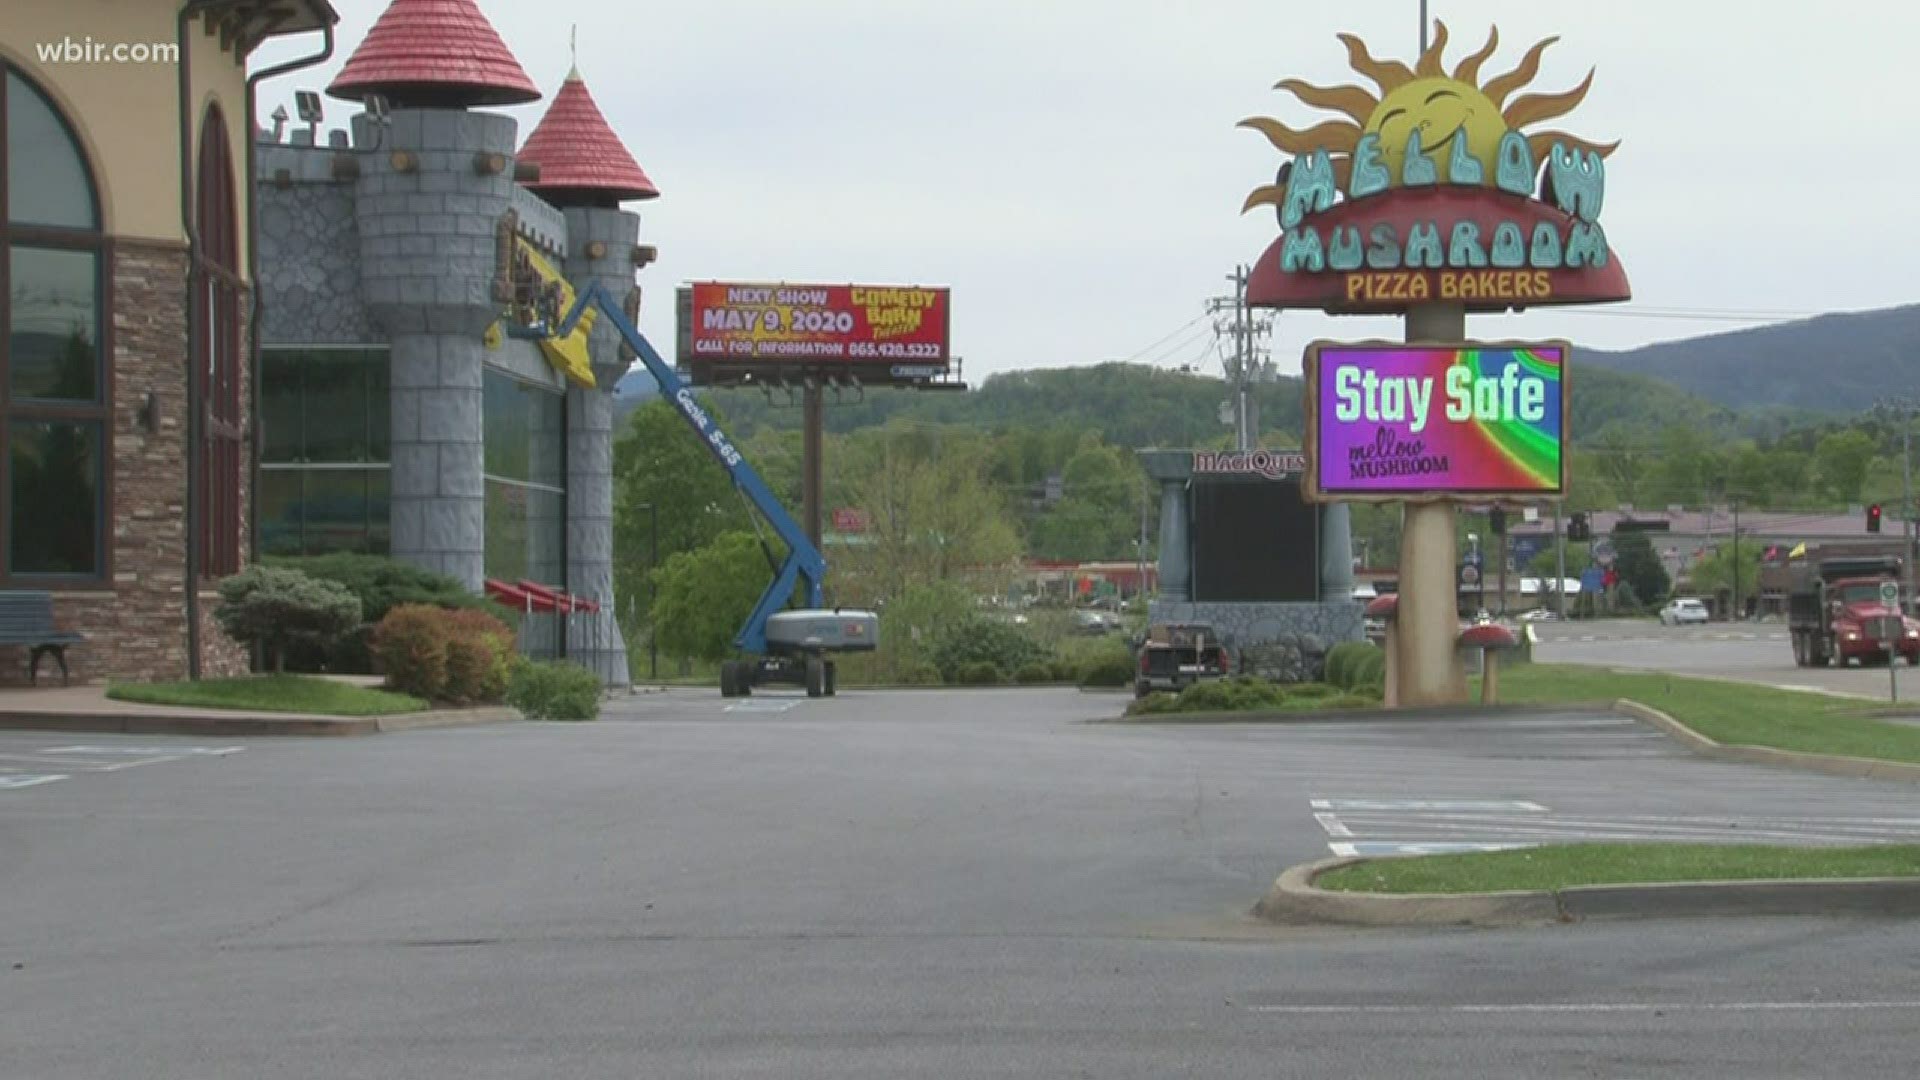 The county's mayor said that the monthlong closure was "devastating" for the county, due to the lack of tourism.